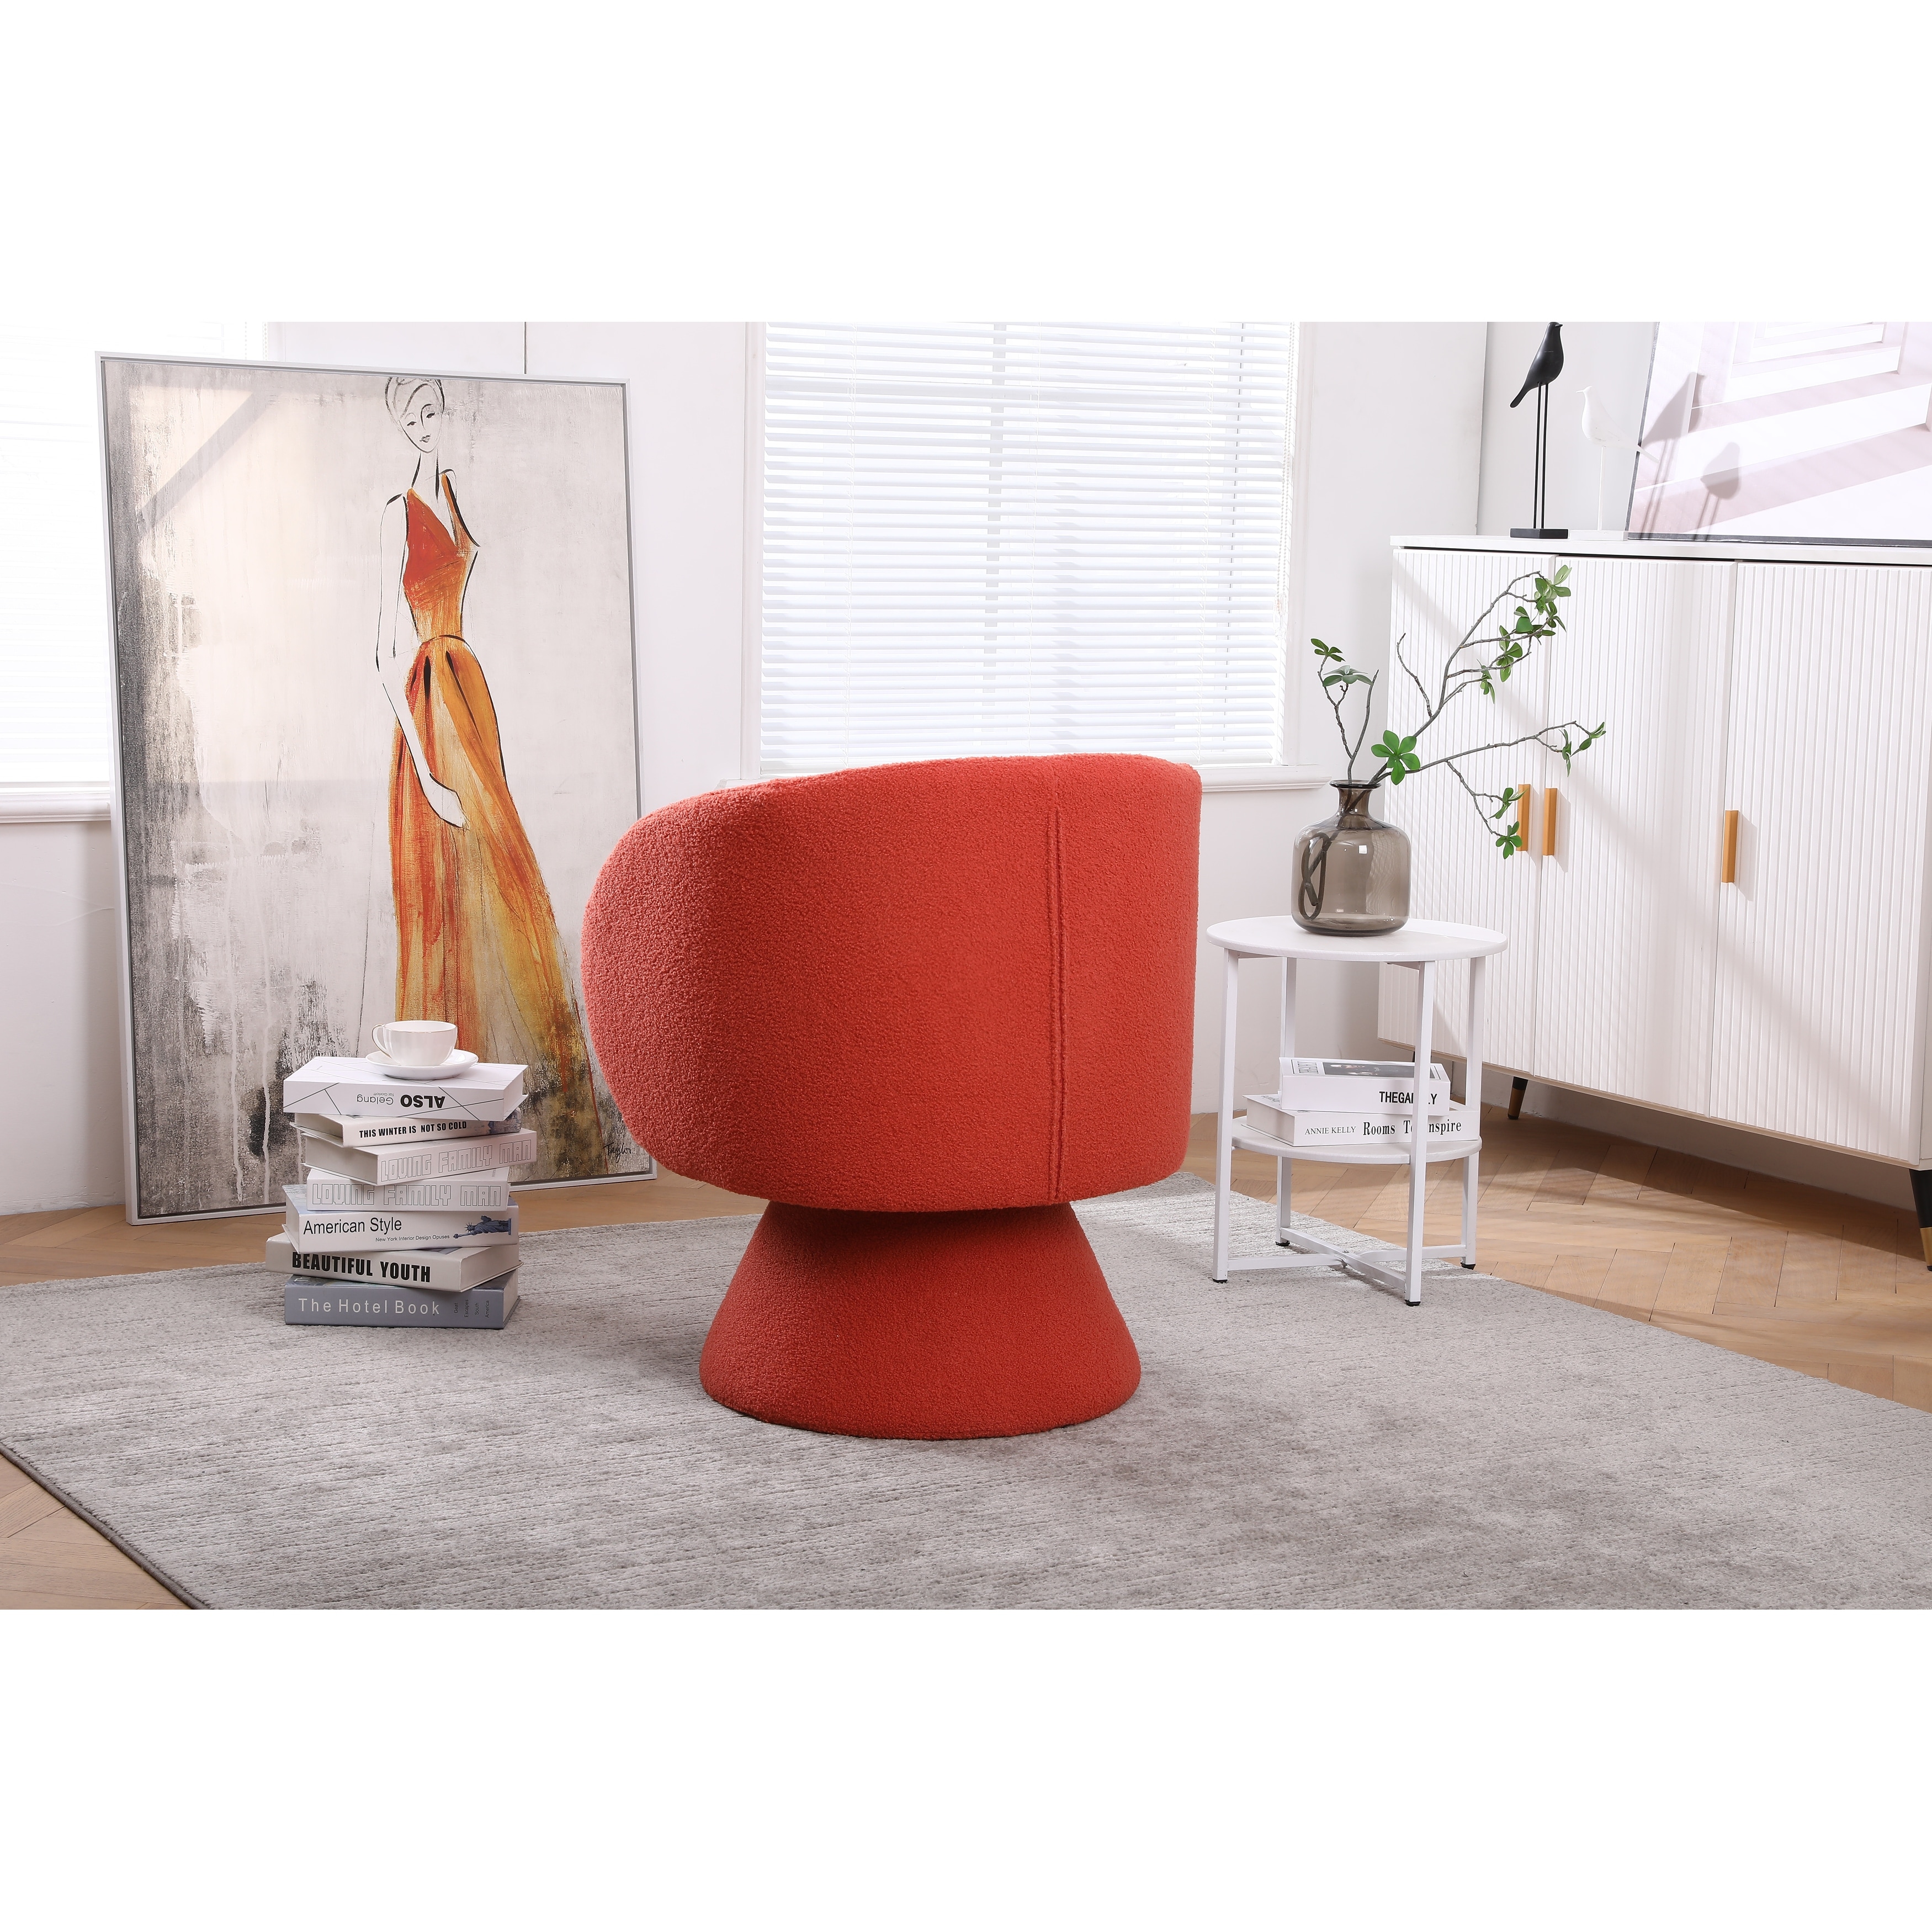 https://ak1.ostkcdn.com/images/products/is/images/direct/8b1e90f28e7a5da2dfb7fed921428ce7d80d60a0/Modern-Accent-Chair-Swivel-Armchair%2C-Round-Fabric-Barrel-Chairs-Single-Sofa-Lounge-Chair-with-Small-Pillow-for-Living-Room.jpg